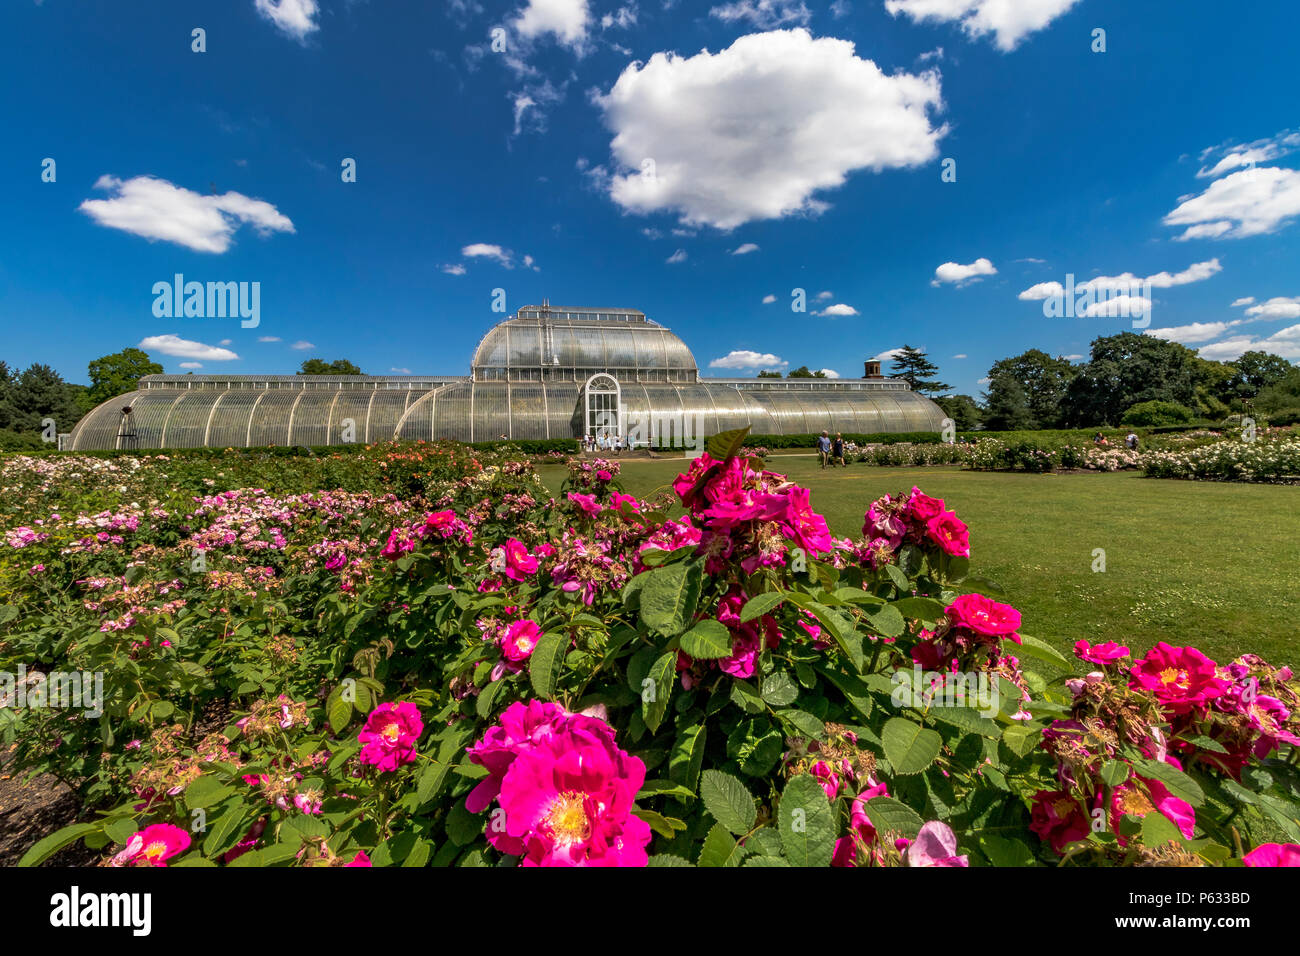 The Palm House and Rose garden at The Royal Botanic Gardens, Kew Stock Photo